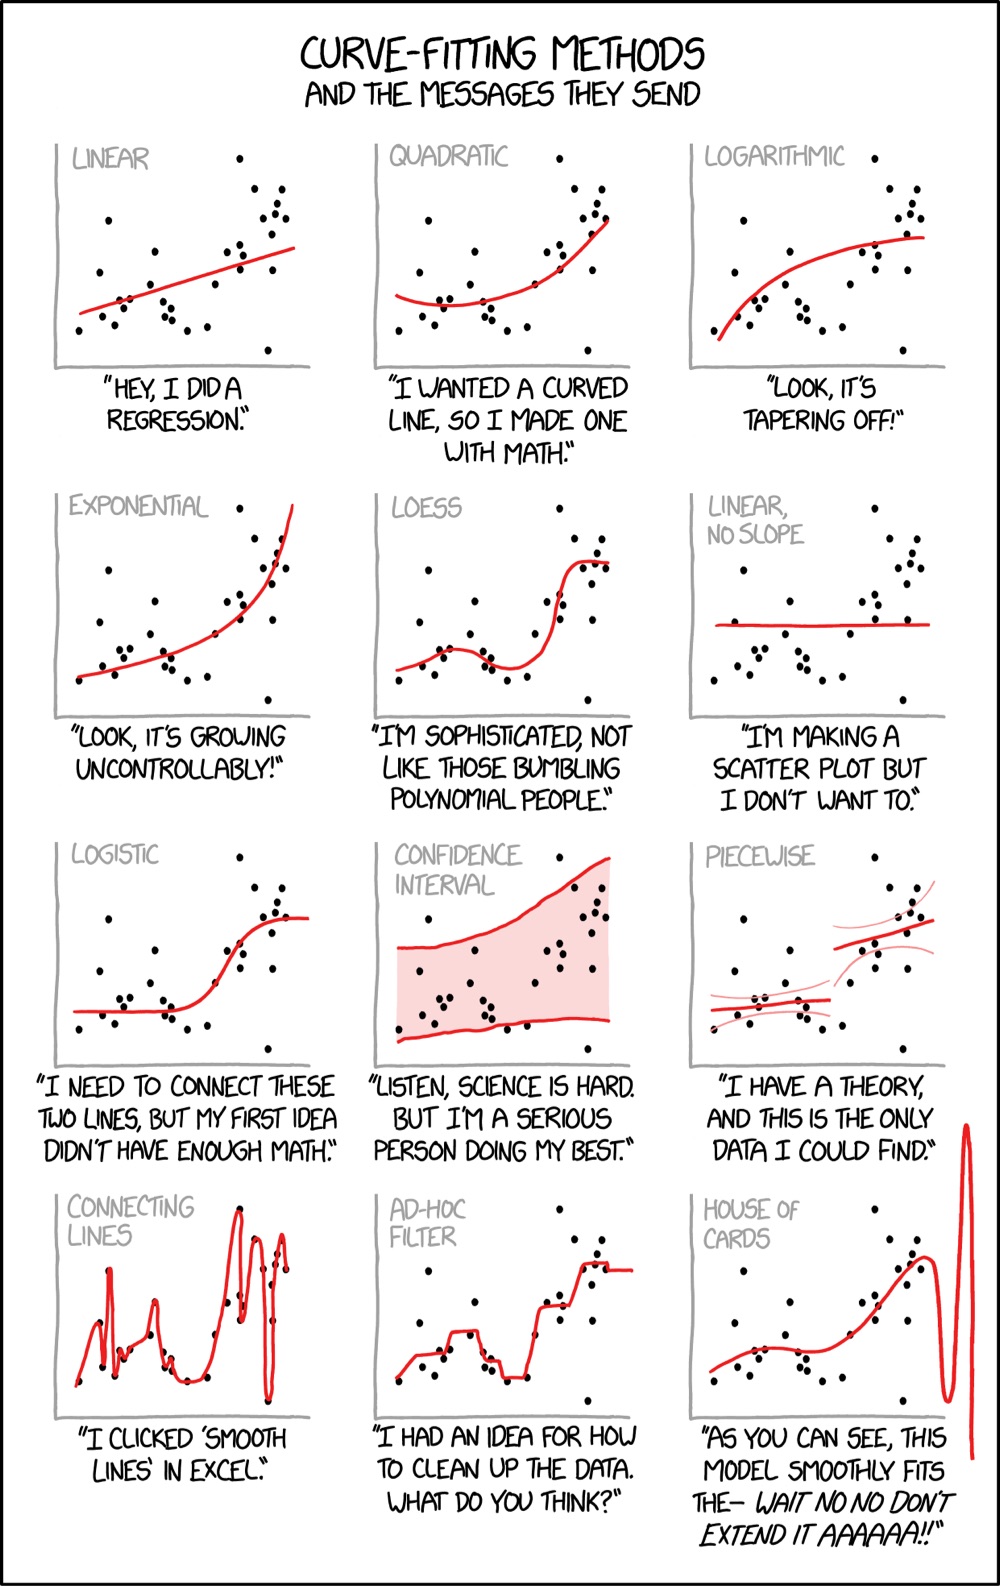 Curve-Fitting Methods and the Messages They Send